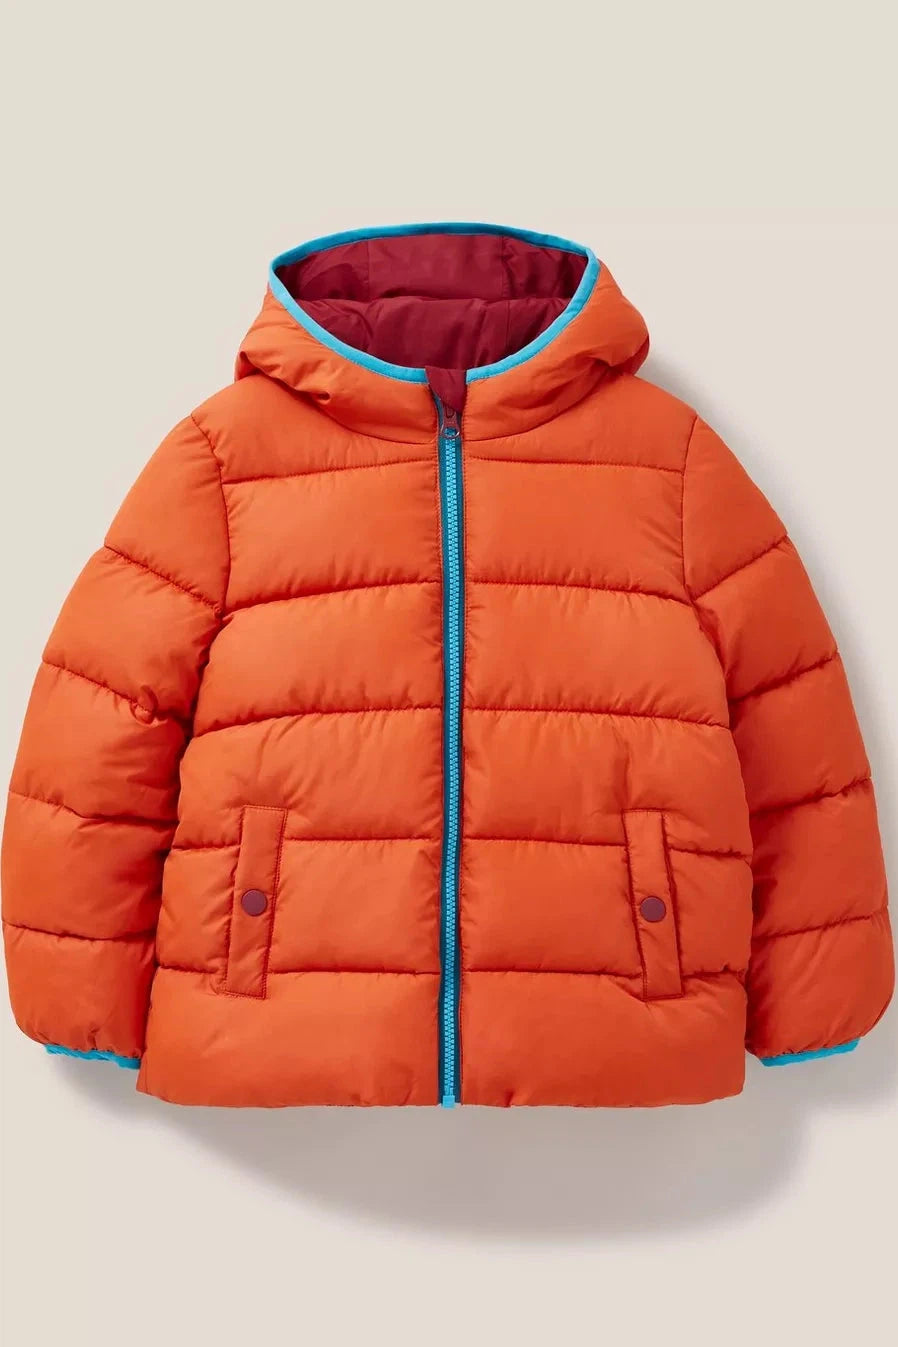 White Stuff Kids Quilted Puffer Jacket-Kids-Ohh! By Gum - Shop Sustainable